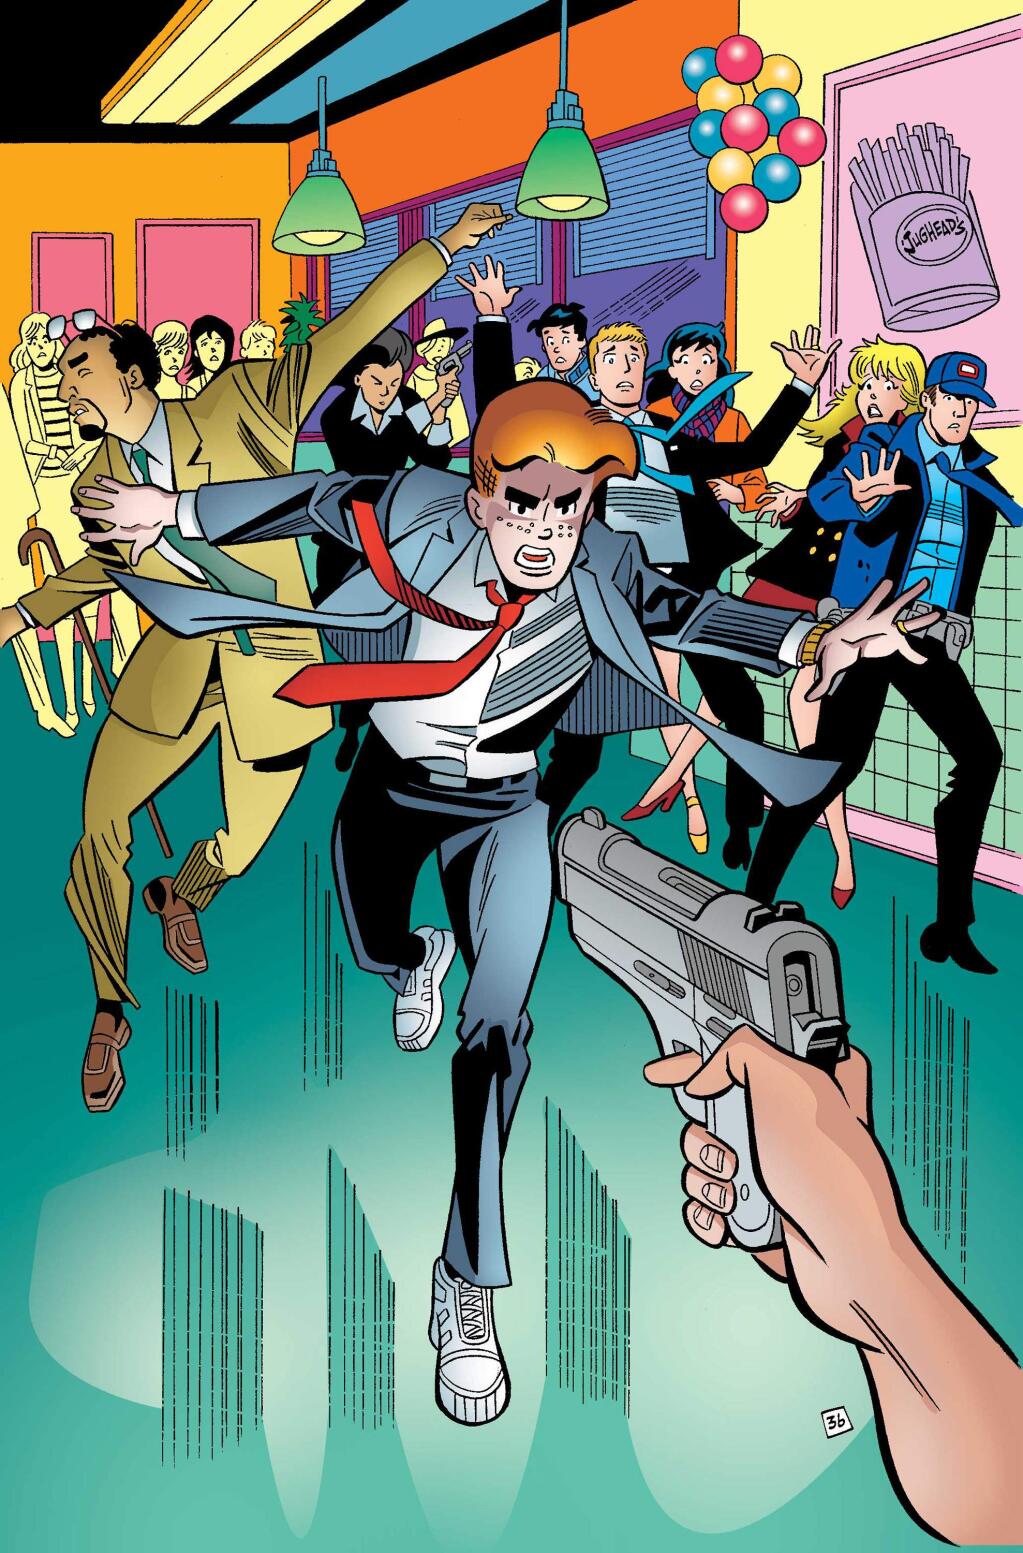 This photo provided by Archie Comics shows Archie in his final moments of life in the comic book, 'Life with Archie,' issue 37. Archie Andrews will die taking a bullet for his gay best friend. The famous freckle-faced comic book icon will die in the July 16, 2014 installment of 'Life with Archie' while intervening in the assassination of Kevin Keller, Archie Comics' first openly gay character. (AP Photo/Archie Comics)